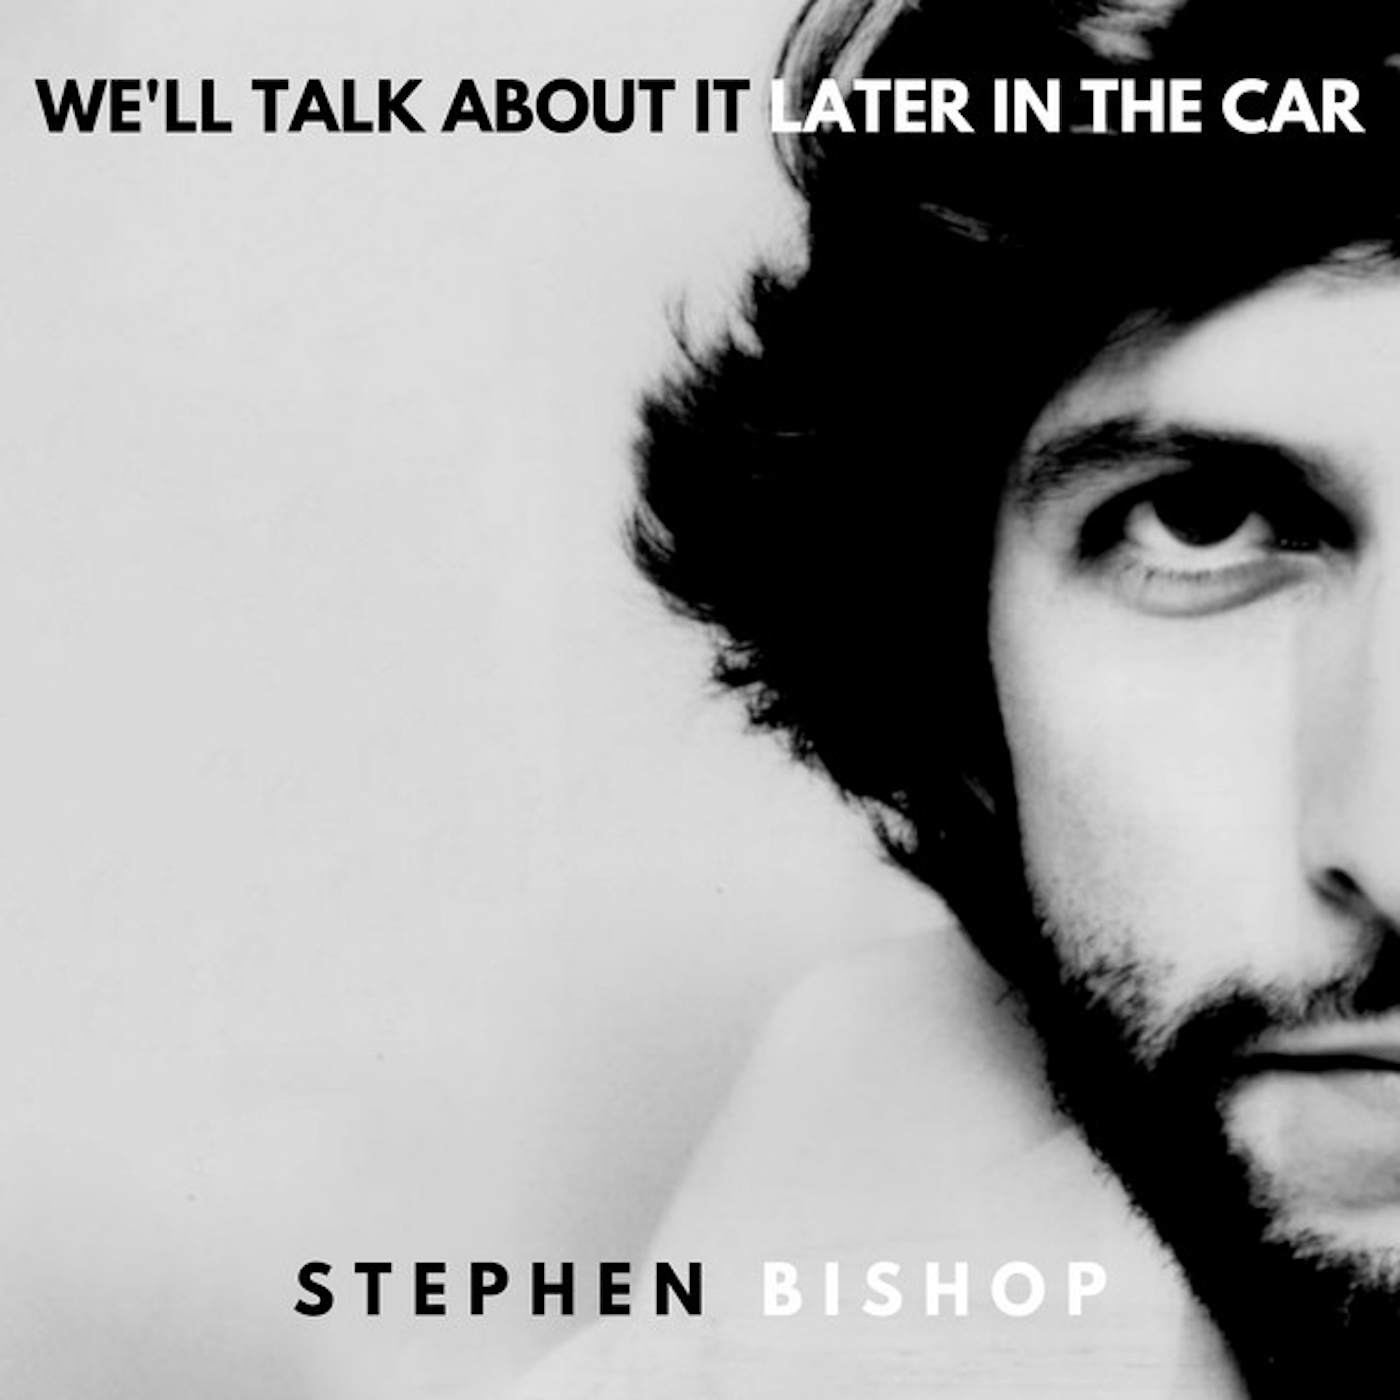 Stephen Bishop WE'LL TALK ABOUT IT LATER IN THE CAR CD